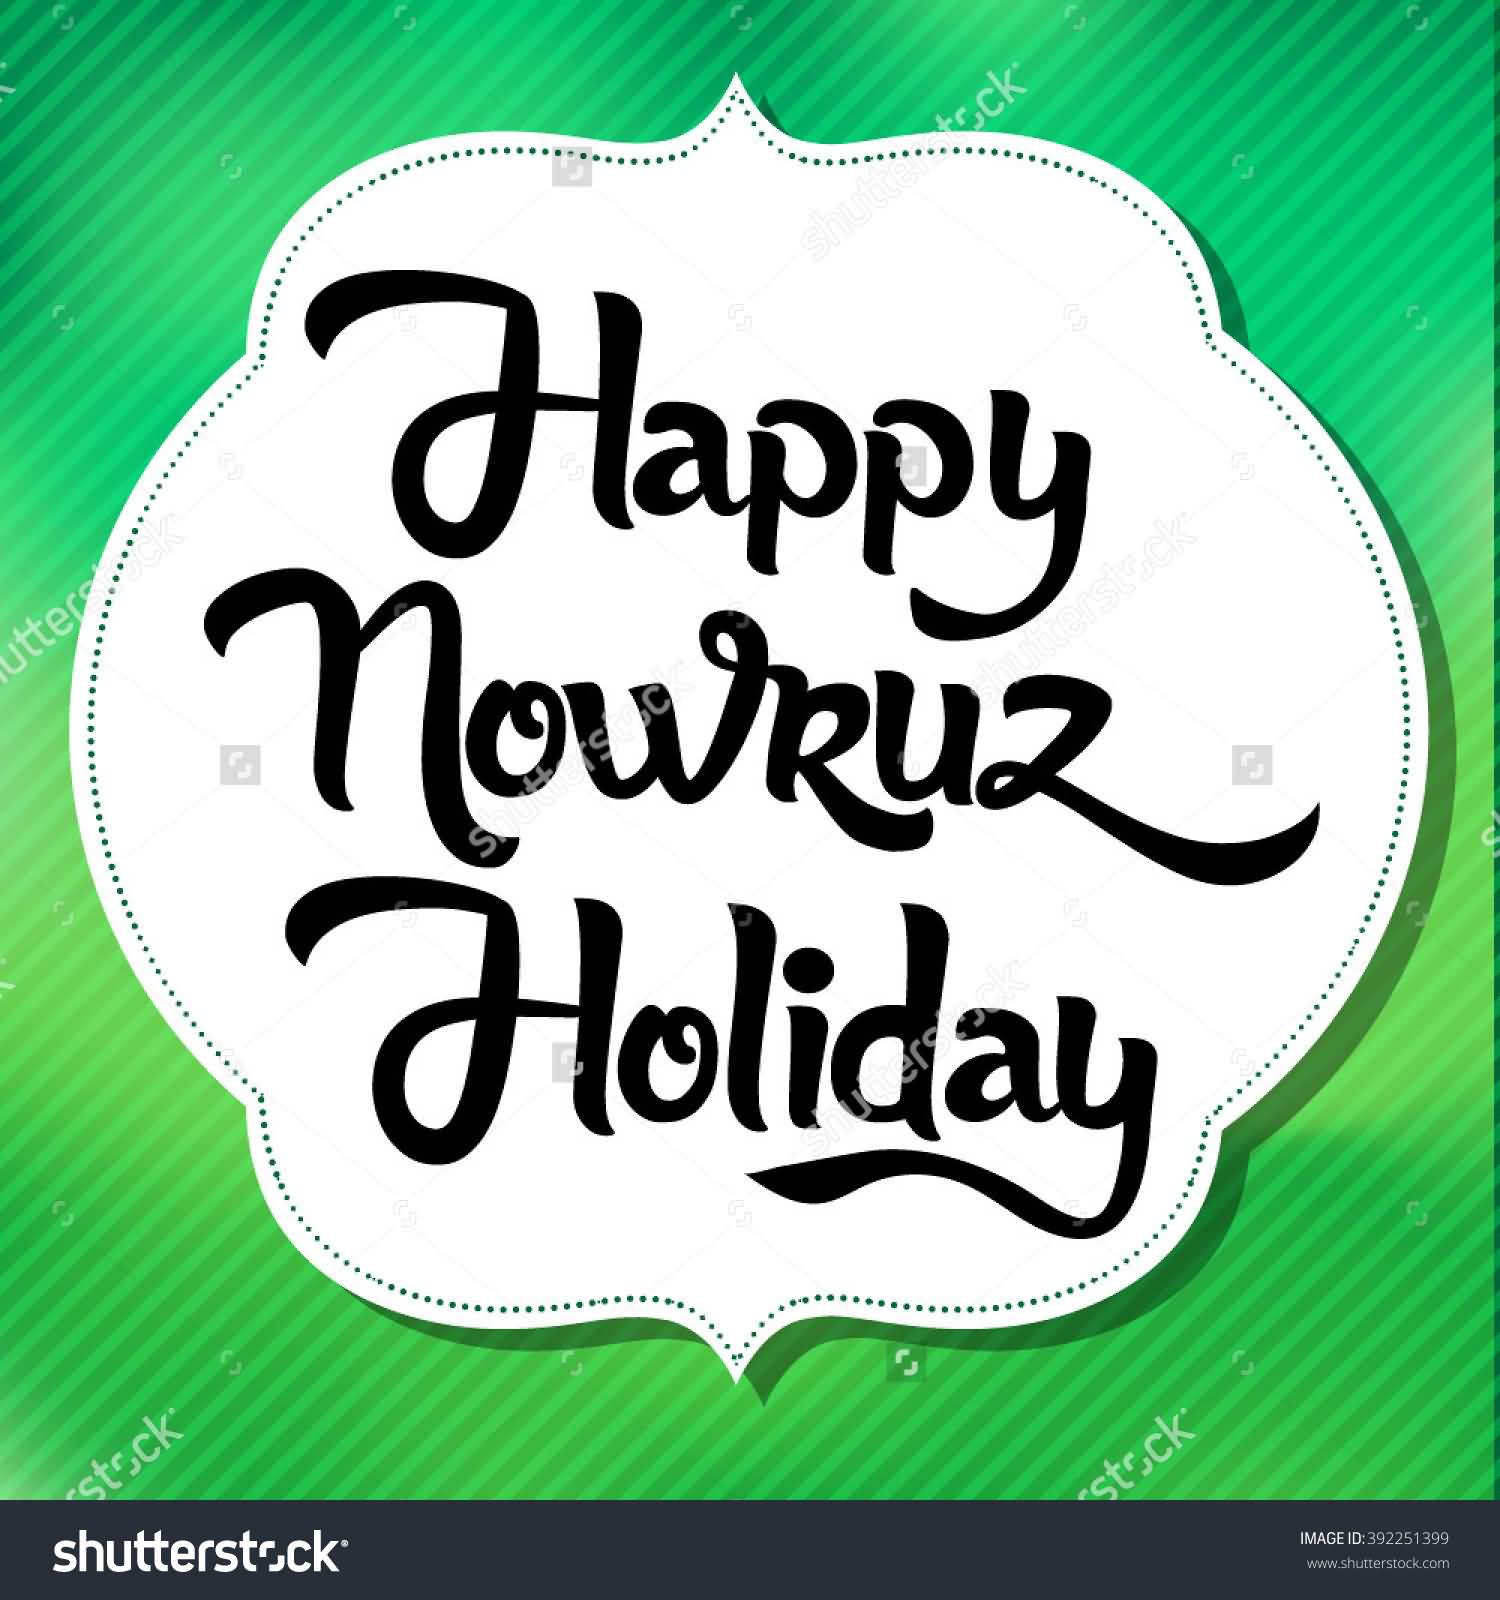 Happy Nowruz Holiday Greetings Card